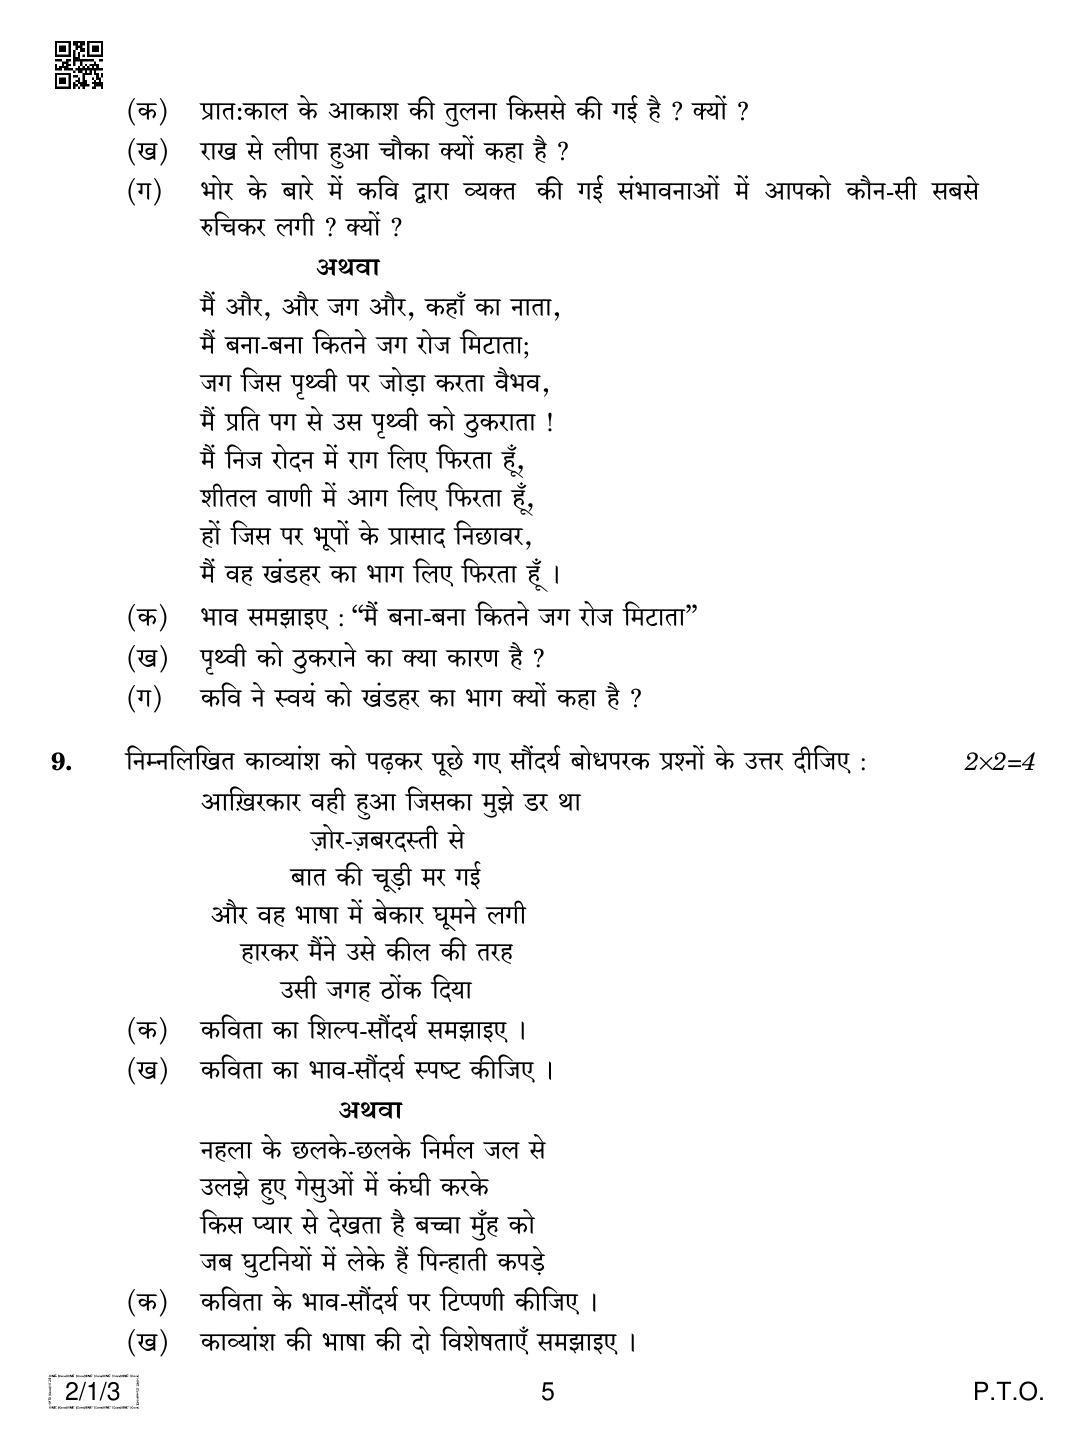 CBSE Class 12 2-1-3 HINDI CORE 2019 Compartment Question Paper - Page 5